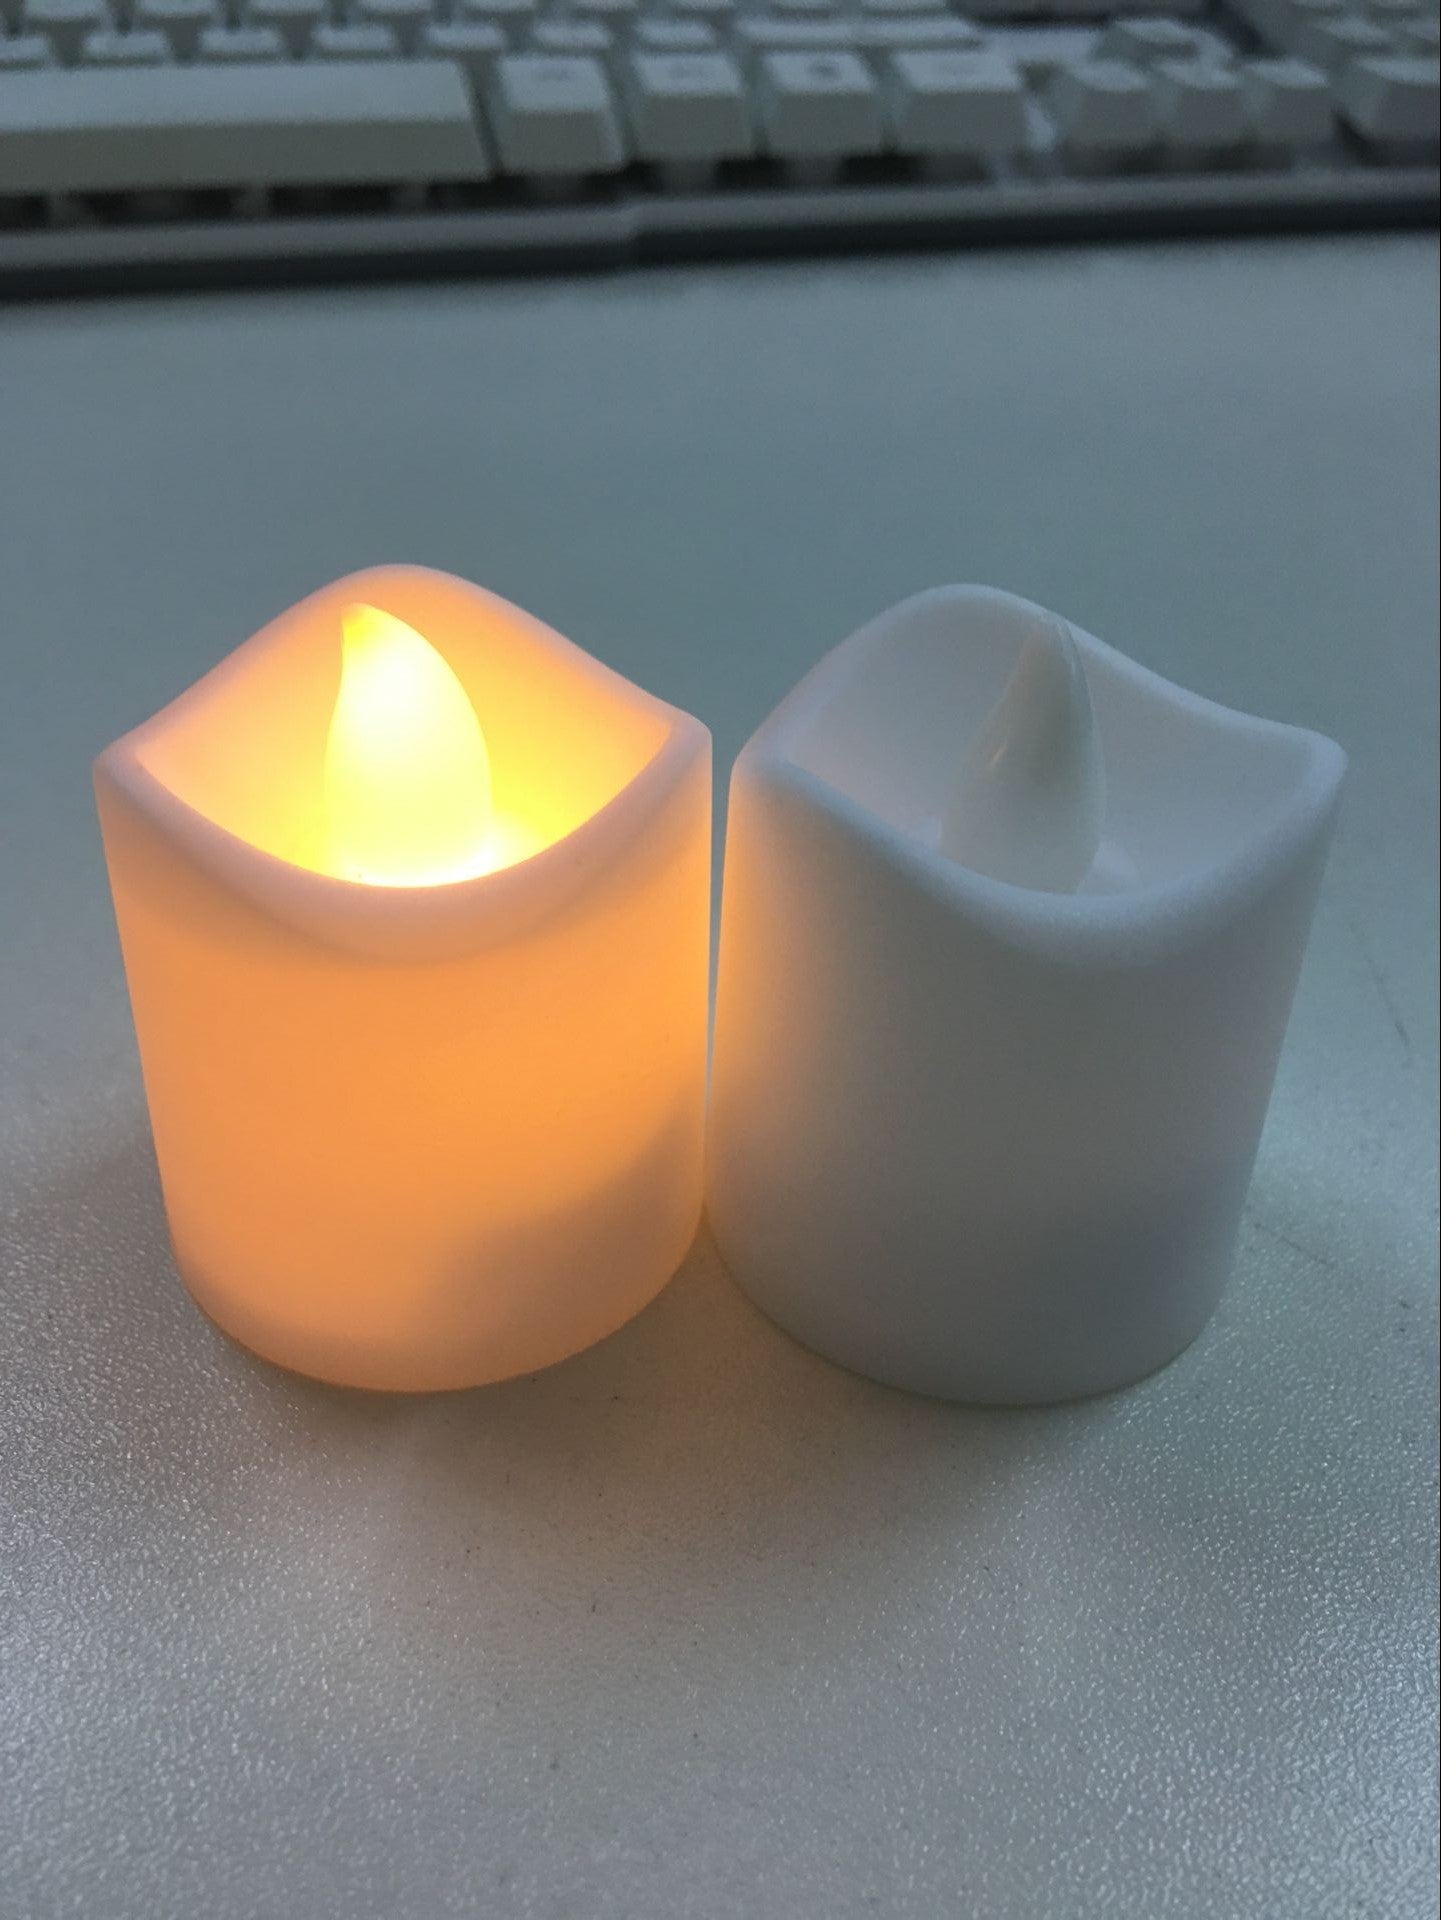 Flameless LED Lights Candles Wavy Edge Electronic Candles for Wedding Party Home Decoration black_4.5 * 4 * 4 ZopiStyle